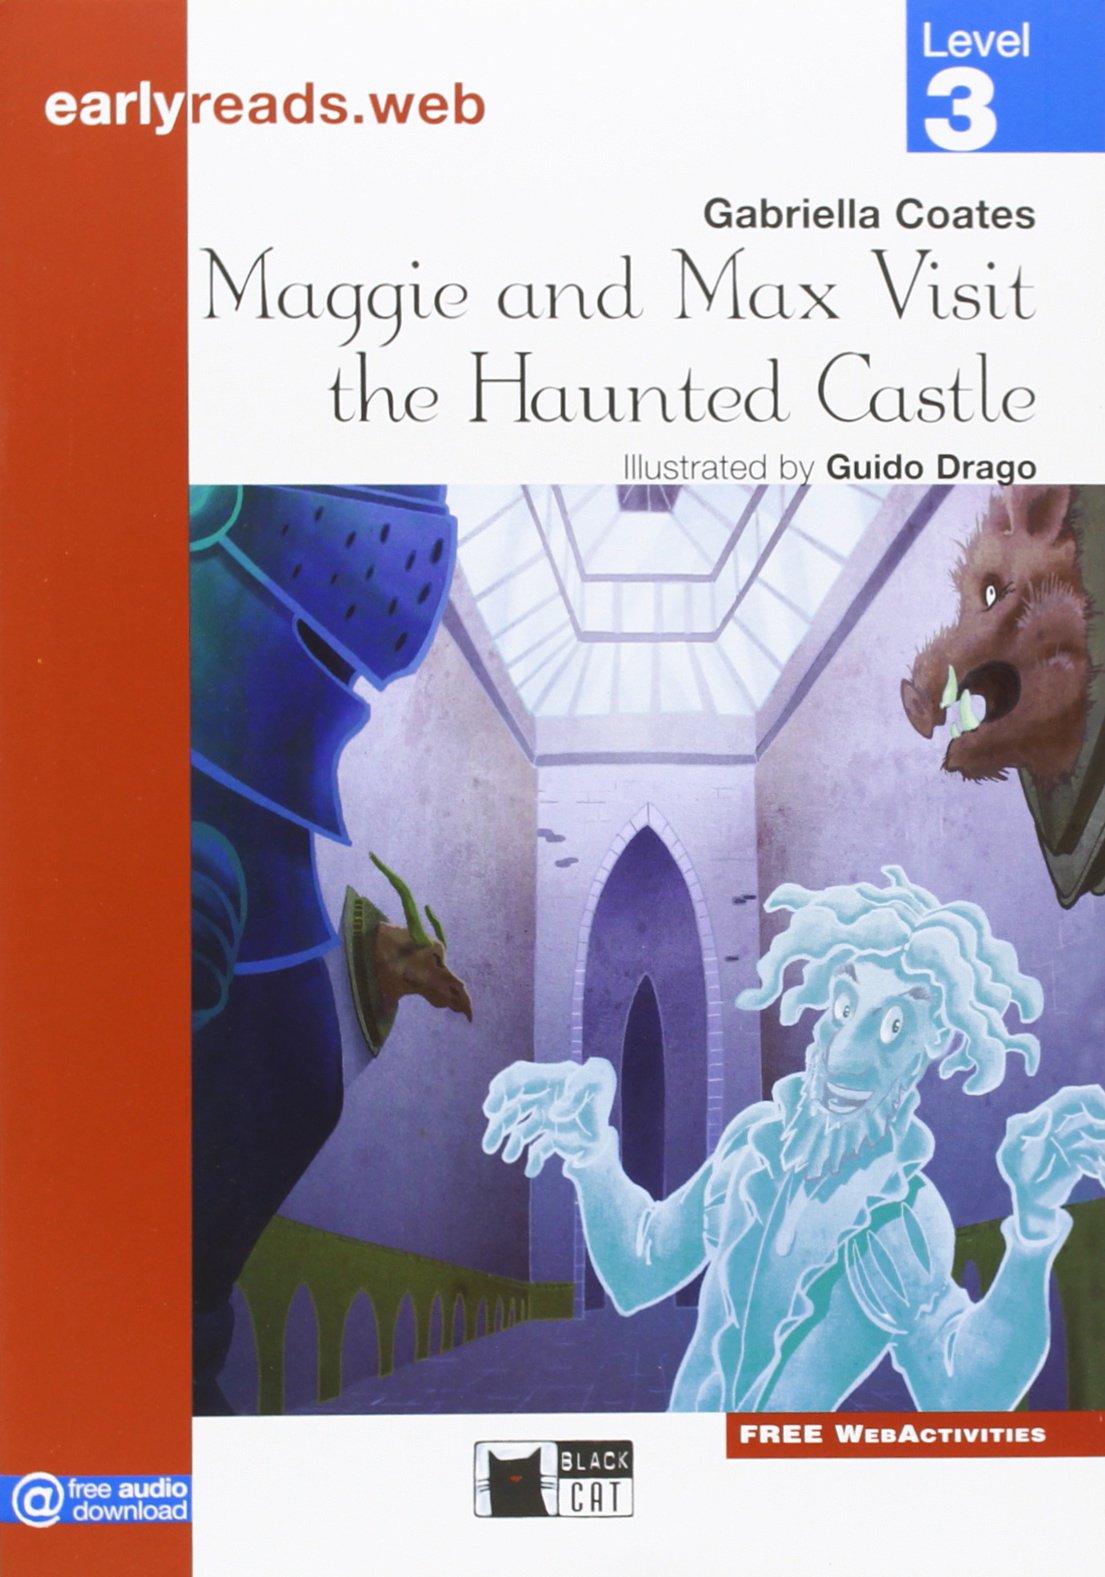 MAGGIE AND MAX VISIT THE HAUNTED CASTLE (EARLYREADS LEVEL 3)  Book 